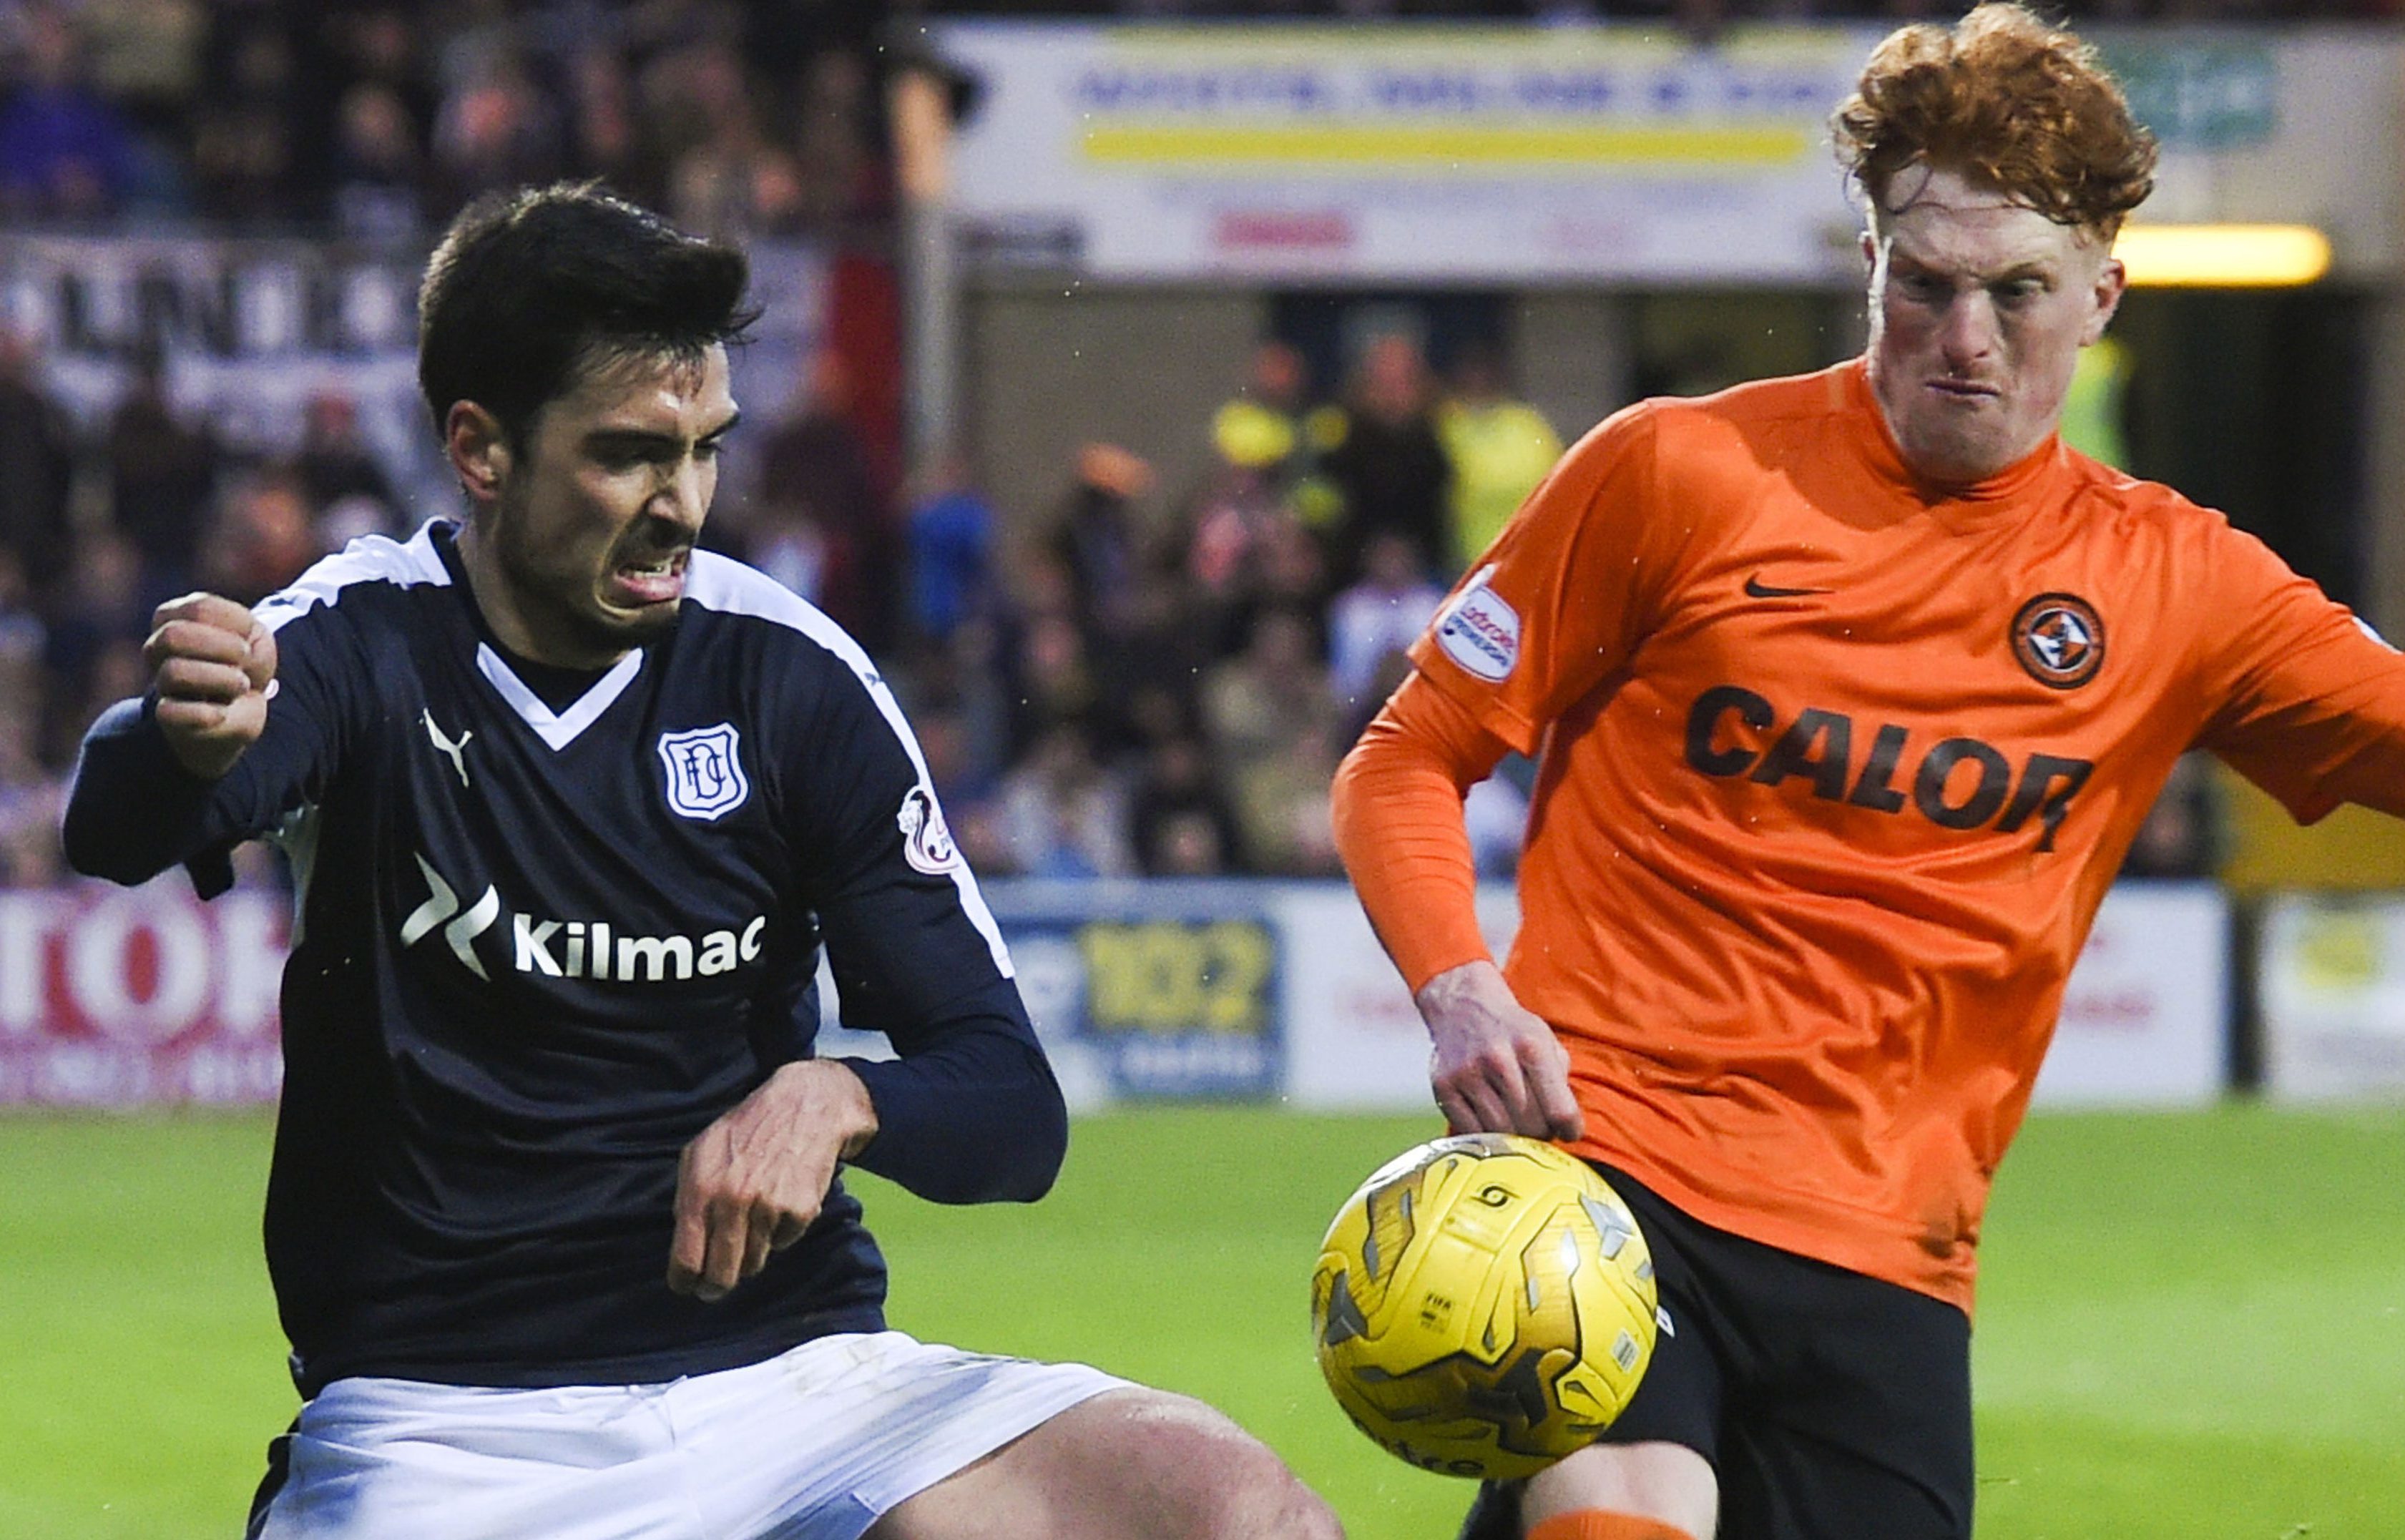 Should Dundee derbies be thing of the past?